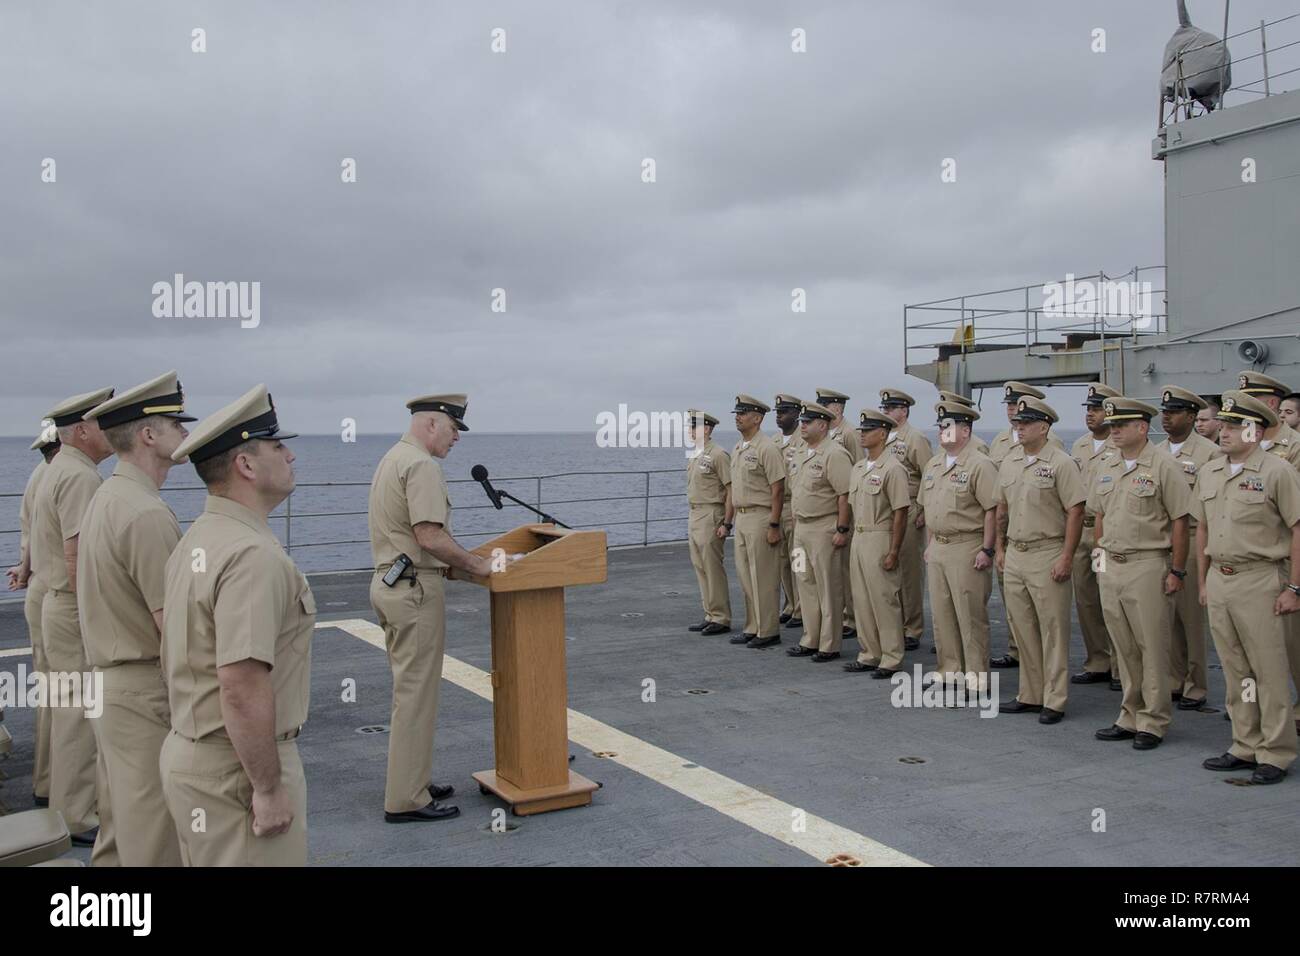 PACIFIC OCEAN (April 1, 2017) Command Master Chief Wade Tandberg reads the Chief Petty Officer’s Creed aboard the submarine tender USS Frank Cable (AS 40), during the Chief’s 124th birthday celebration on the flight deck, April 1.  Frank Cable, en route to Portland, Ore. for her dry-dock phase maintenance availability, conducts maintenance and supports submarines and surface vessels deployed to the Indo-Asia-Pacific region. Stock Photo